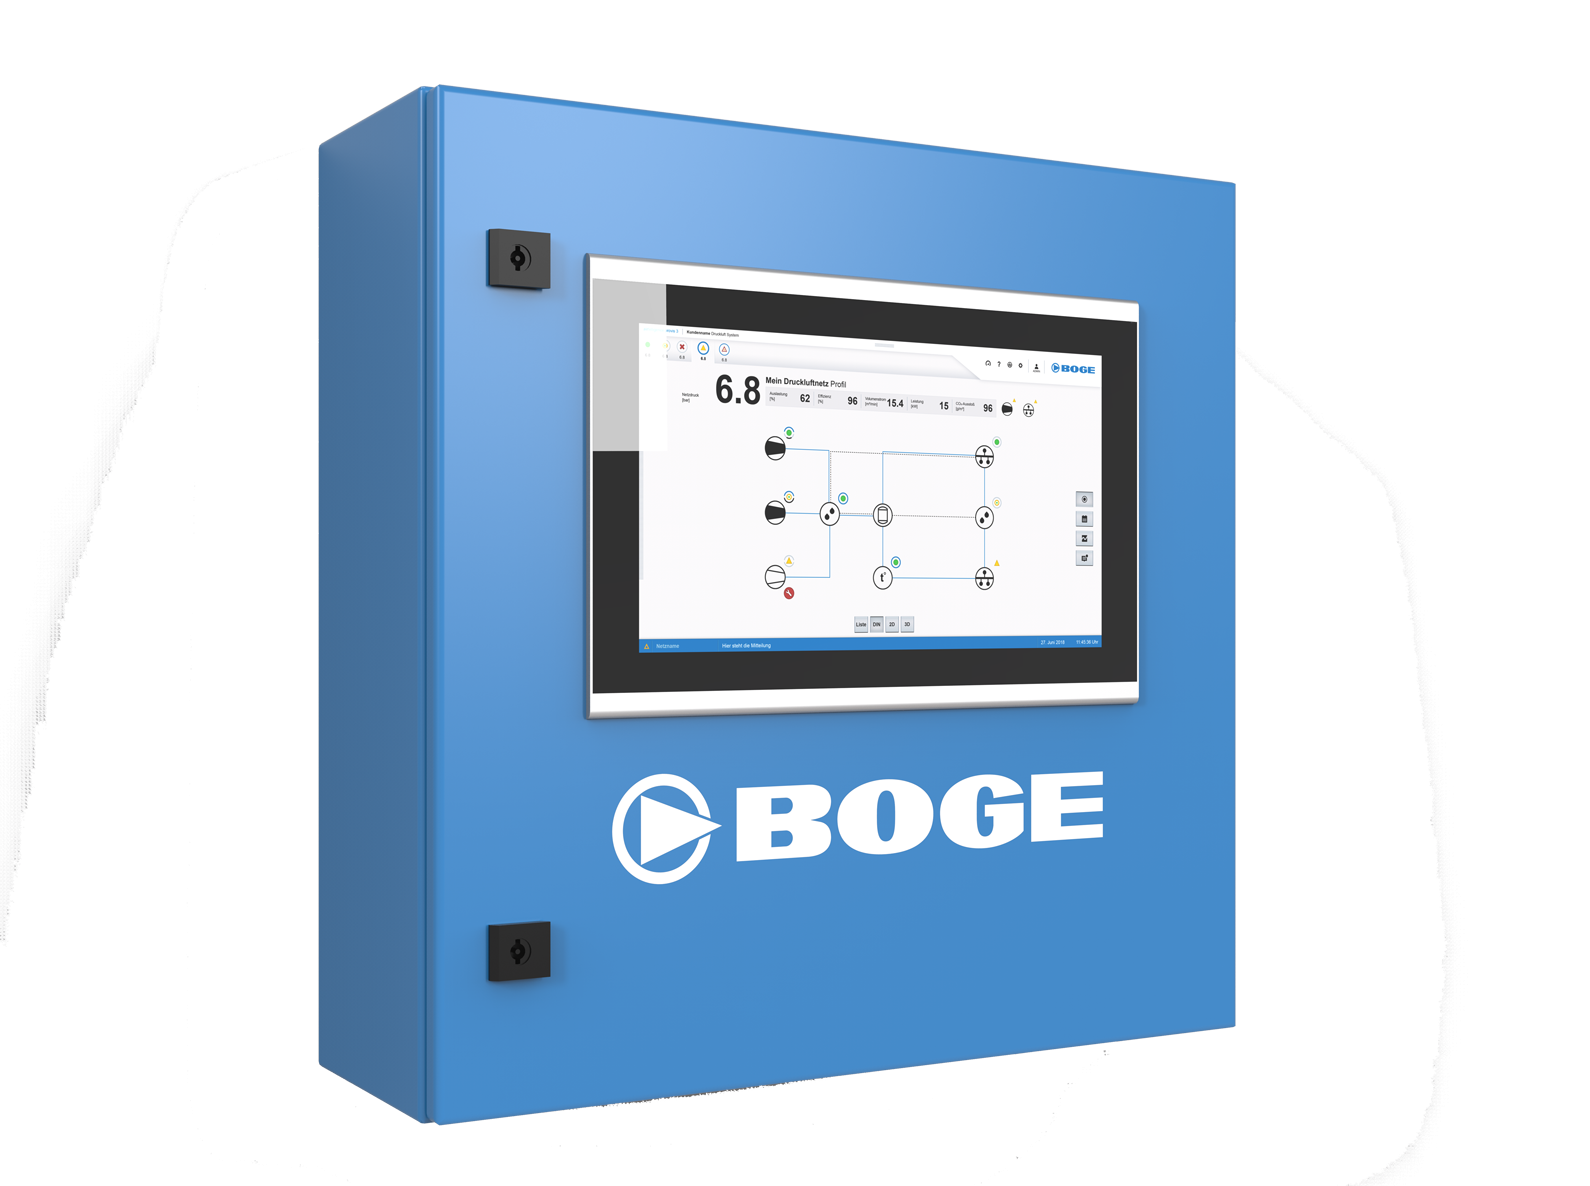 2. BOGE’s airtelligence provis 3  controls and proactively manages data from an unlimited number of compressors and components  (1).png